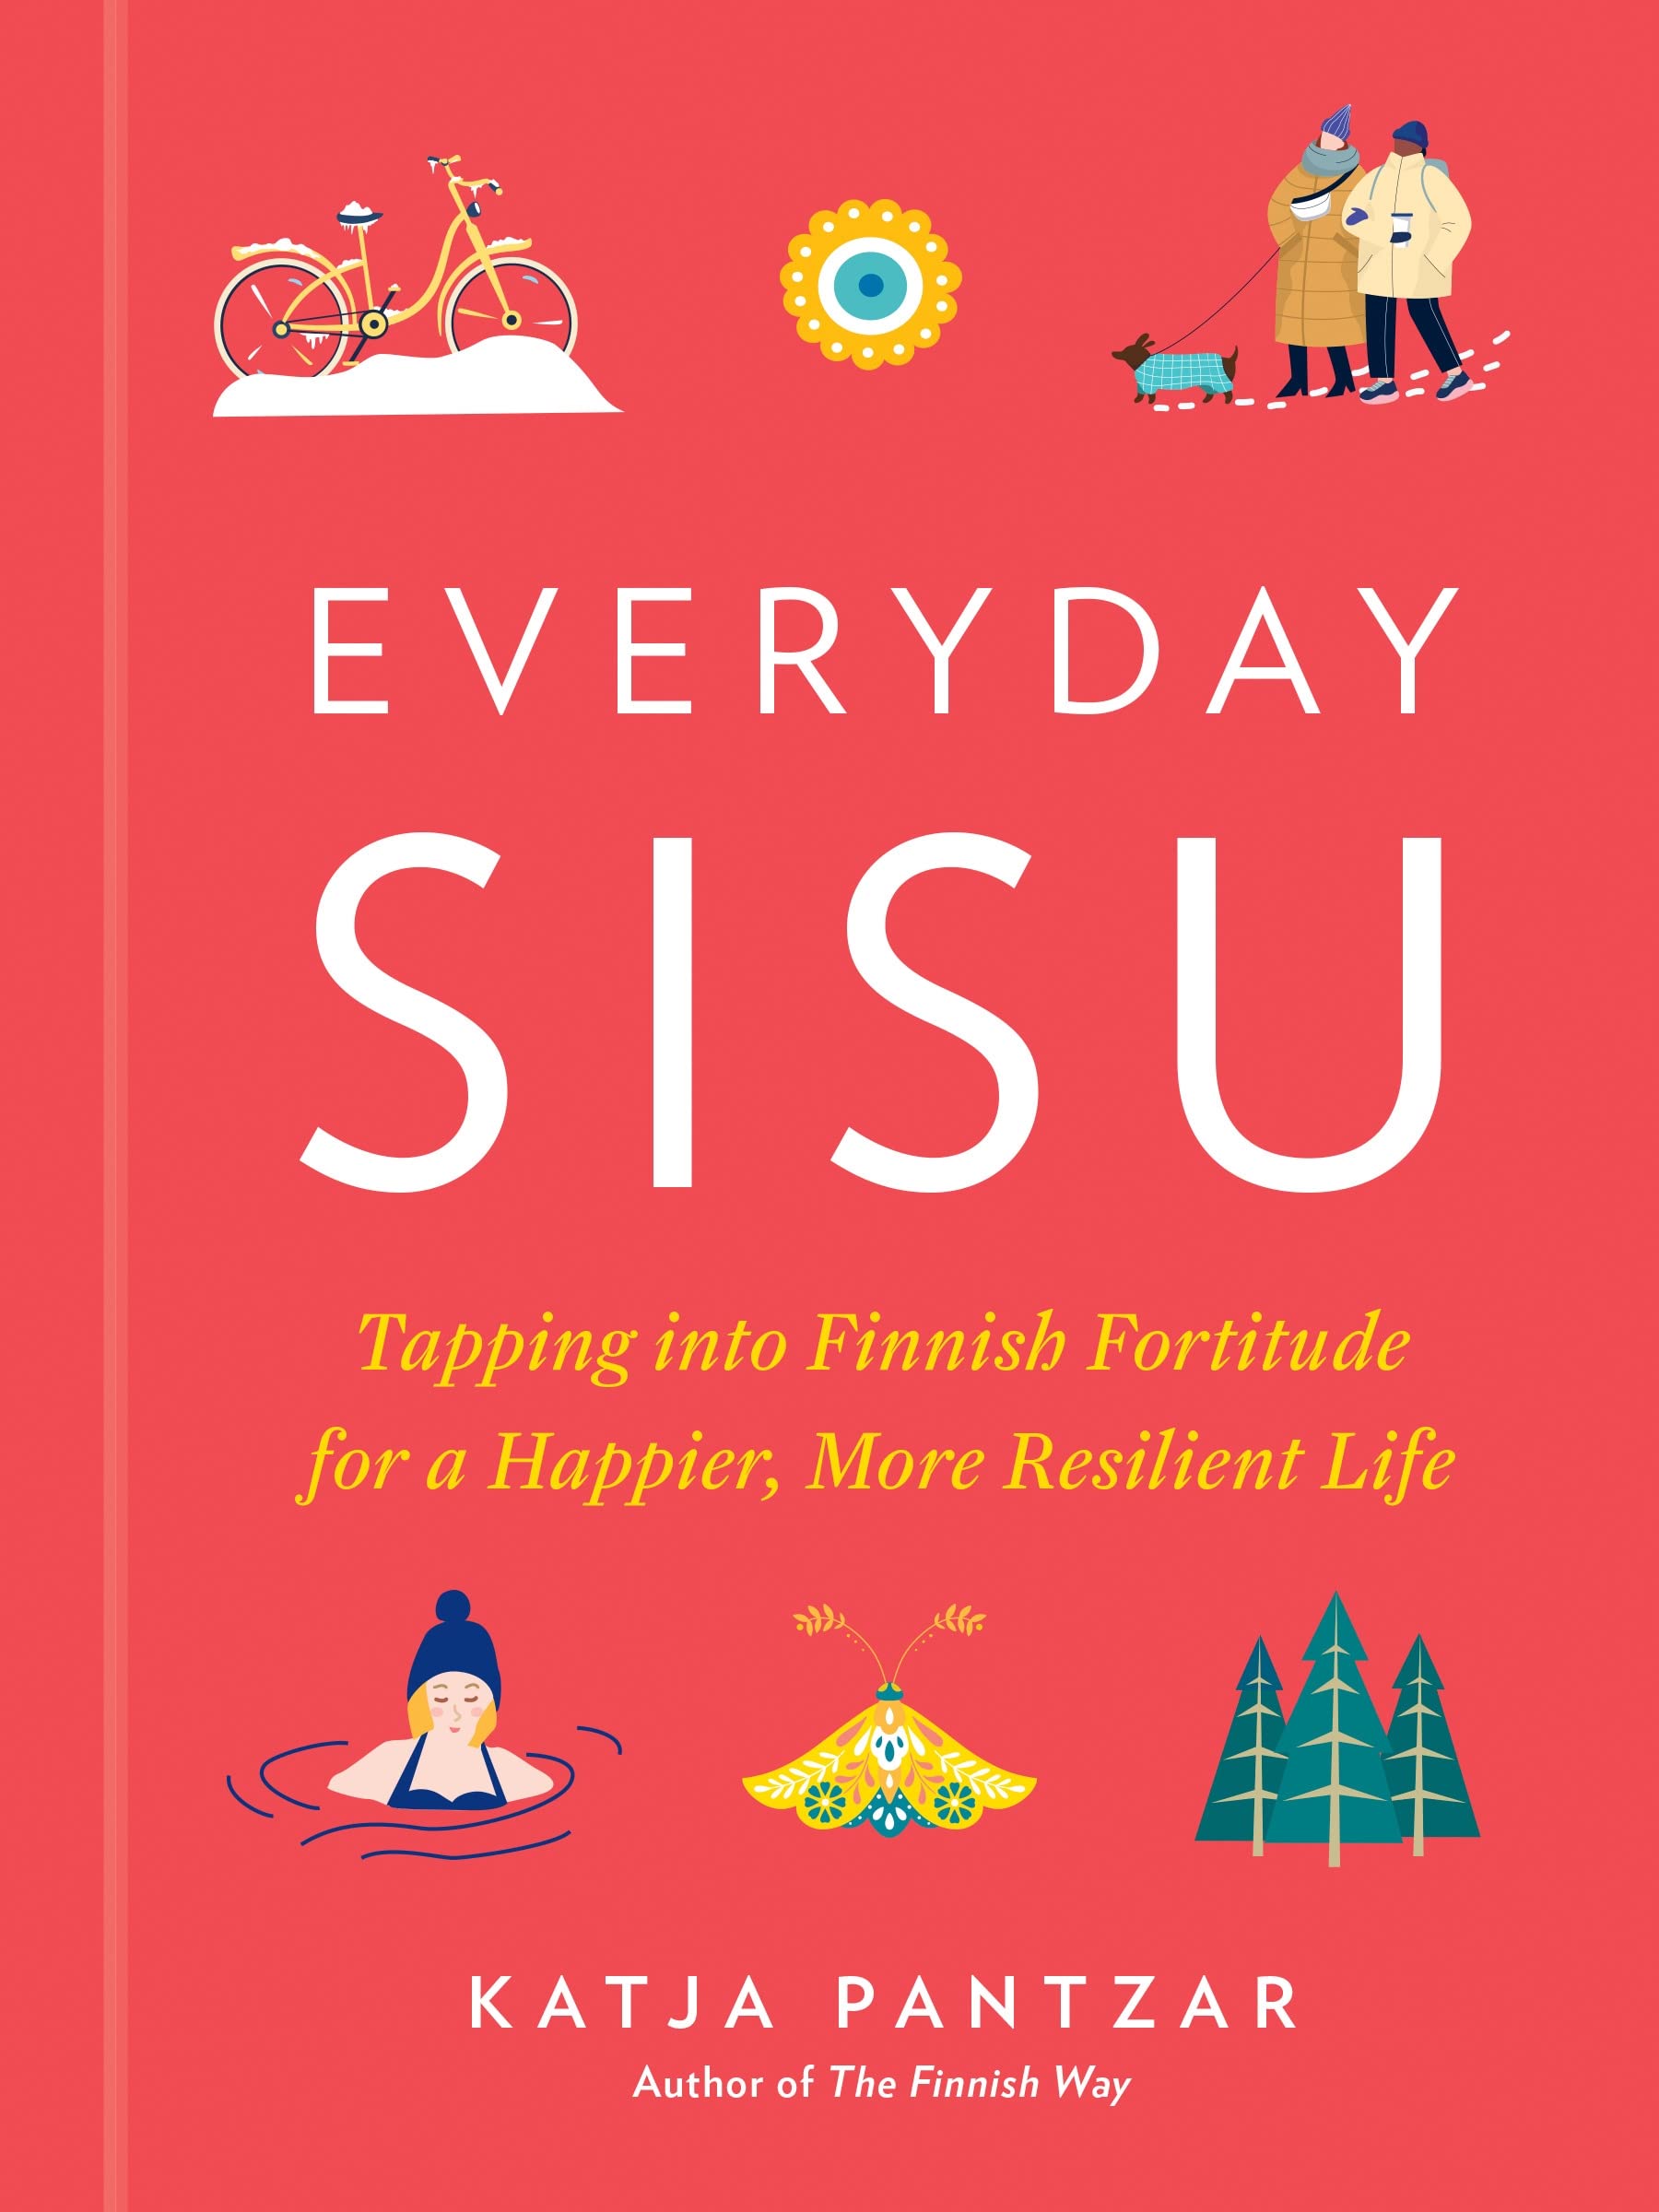 Everyday Sisu Tapping into Finnish Fortitude for a Happier, More Resilient Life